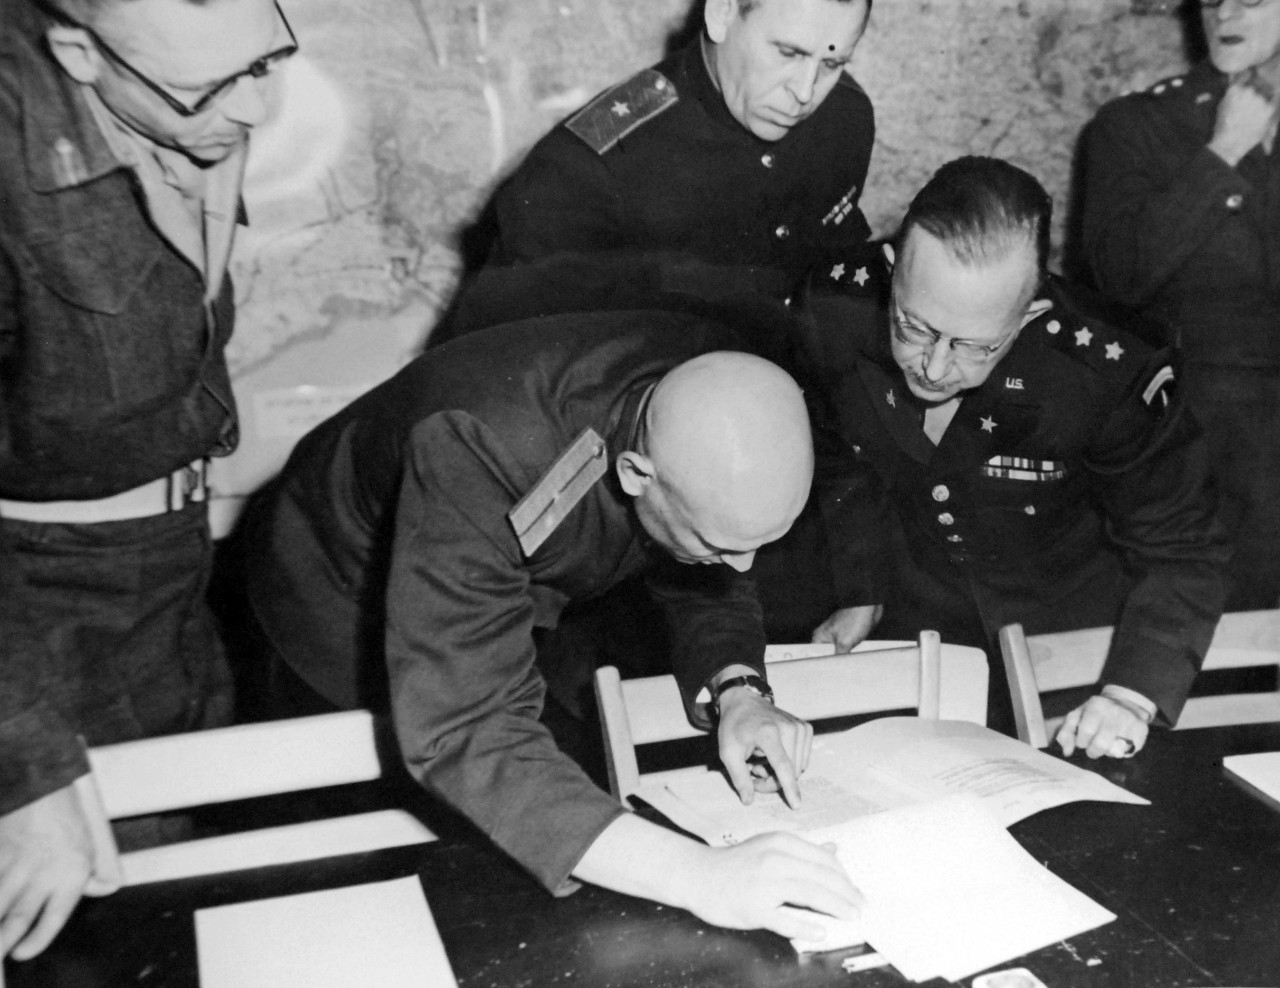 111-SC-27245: Surrender of Germany, 7 May 1945. High Allied Officers check terms of the Unconditional Surrender document during the meeting with representatives of the Doenitz Regime at Supreme Allied Headquarters (SHAEF), Reims, France.  In the picture are Lieutenant General F.E. Morgan, Deputy Chief of Staff, Lieutenant Ivan Cherniaeff, Russian Aide and Interpreter, Major General of Artillery Ivan Alexeyevich Susloparov, and Major General H.R. Bull, G-3, SHAEF.  This photograph is from May 5, 1945.   U.S. Army Photograph. Courtesy of the Library of Congress Collection, Lot-8988. (2015/10/16).